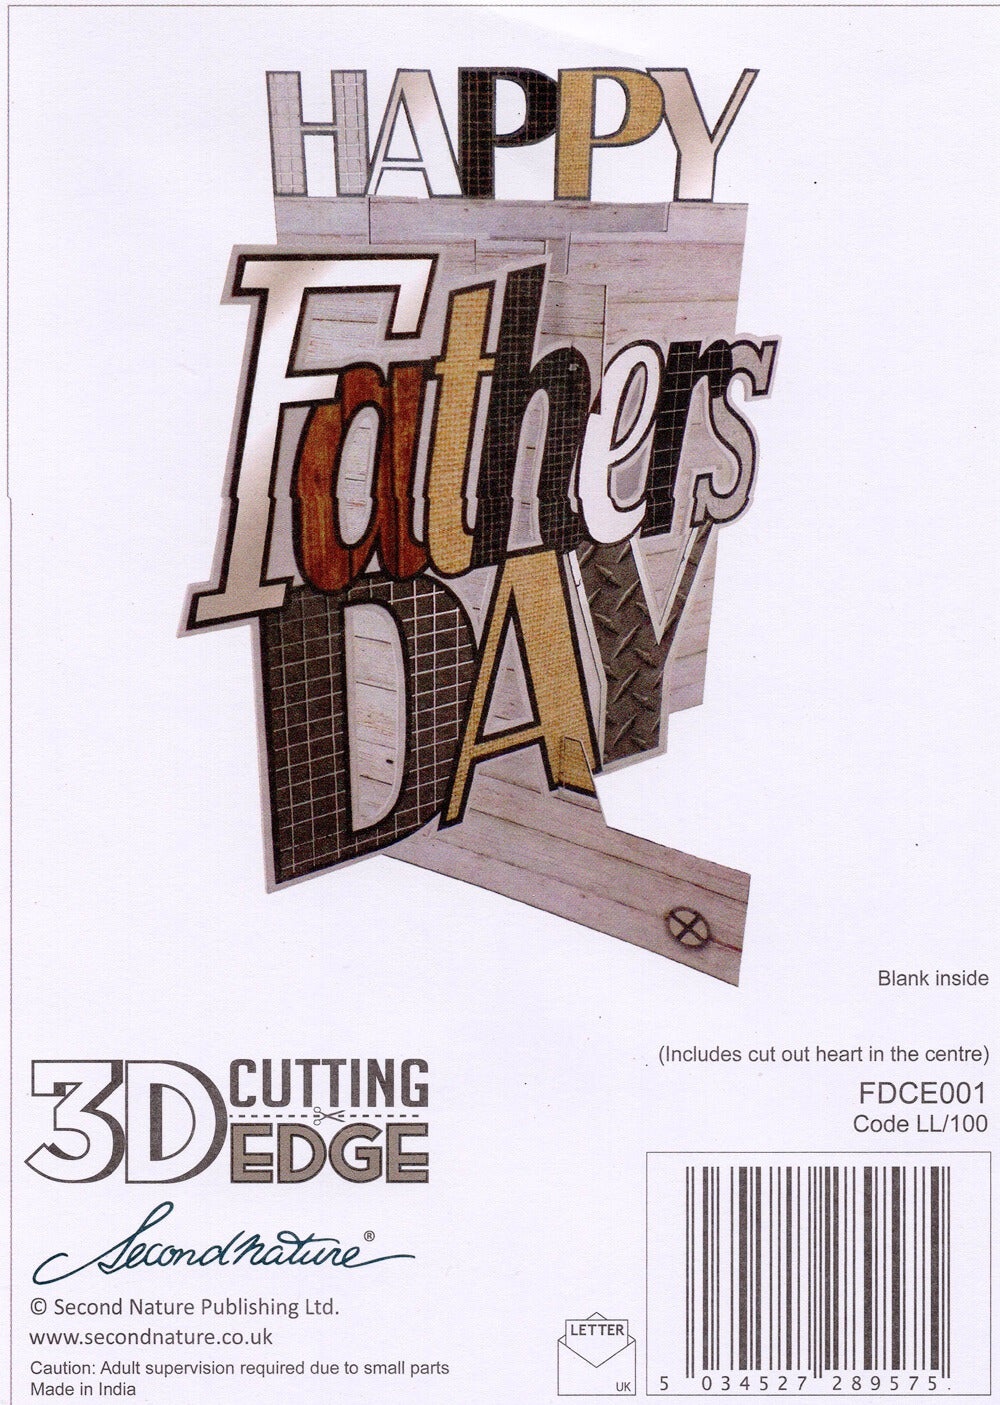 Happy Father's Day 3D Cutting Edge Greeting Card